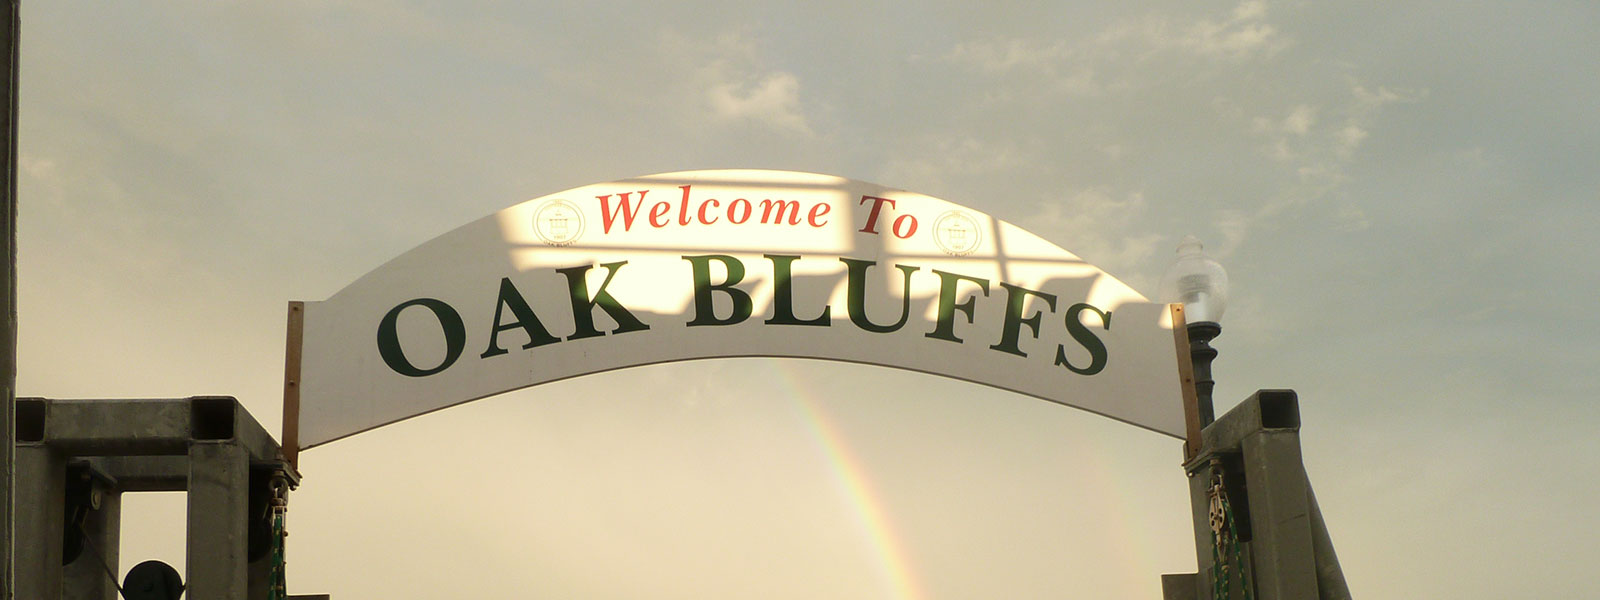 Welcome to Oak Bluffs sign